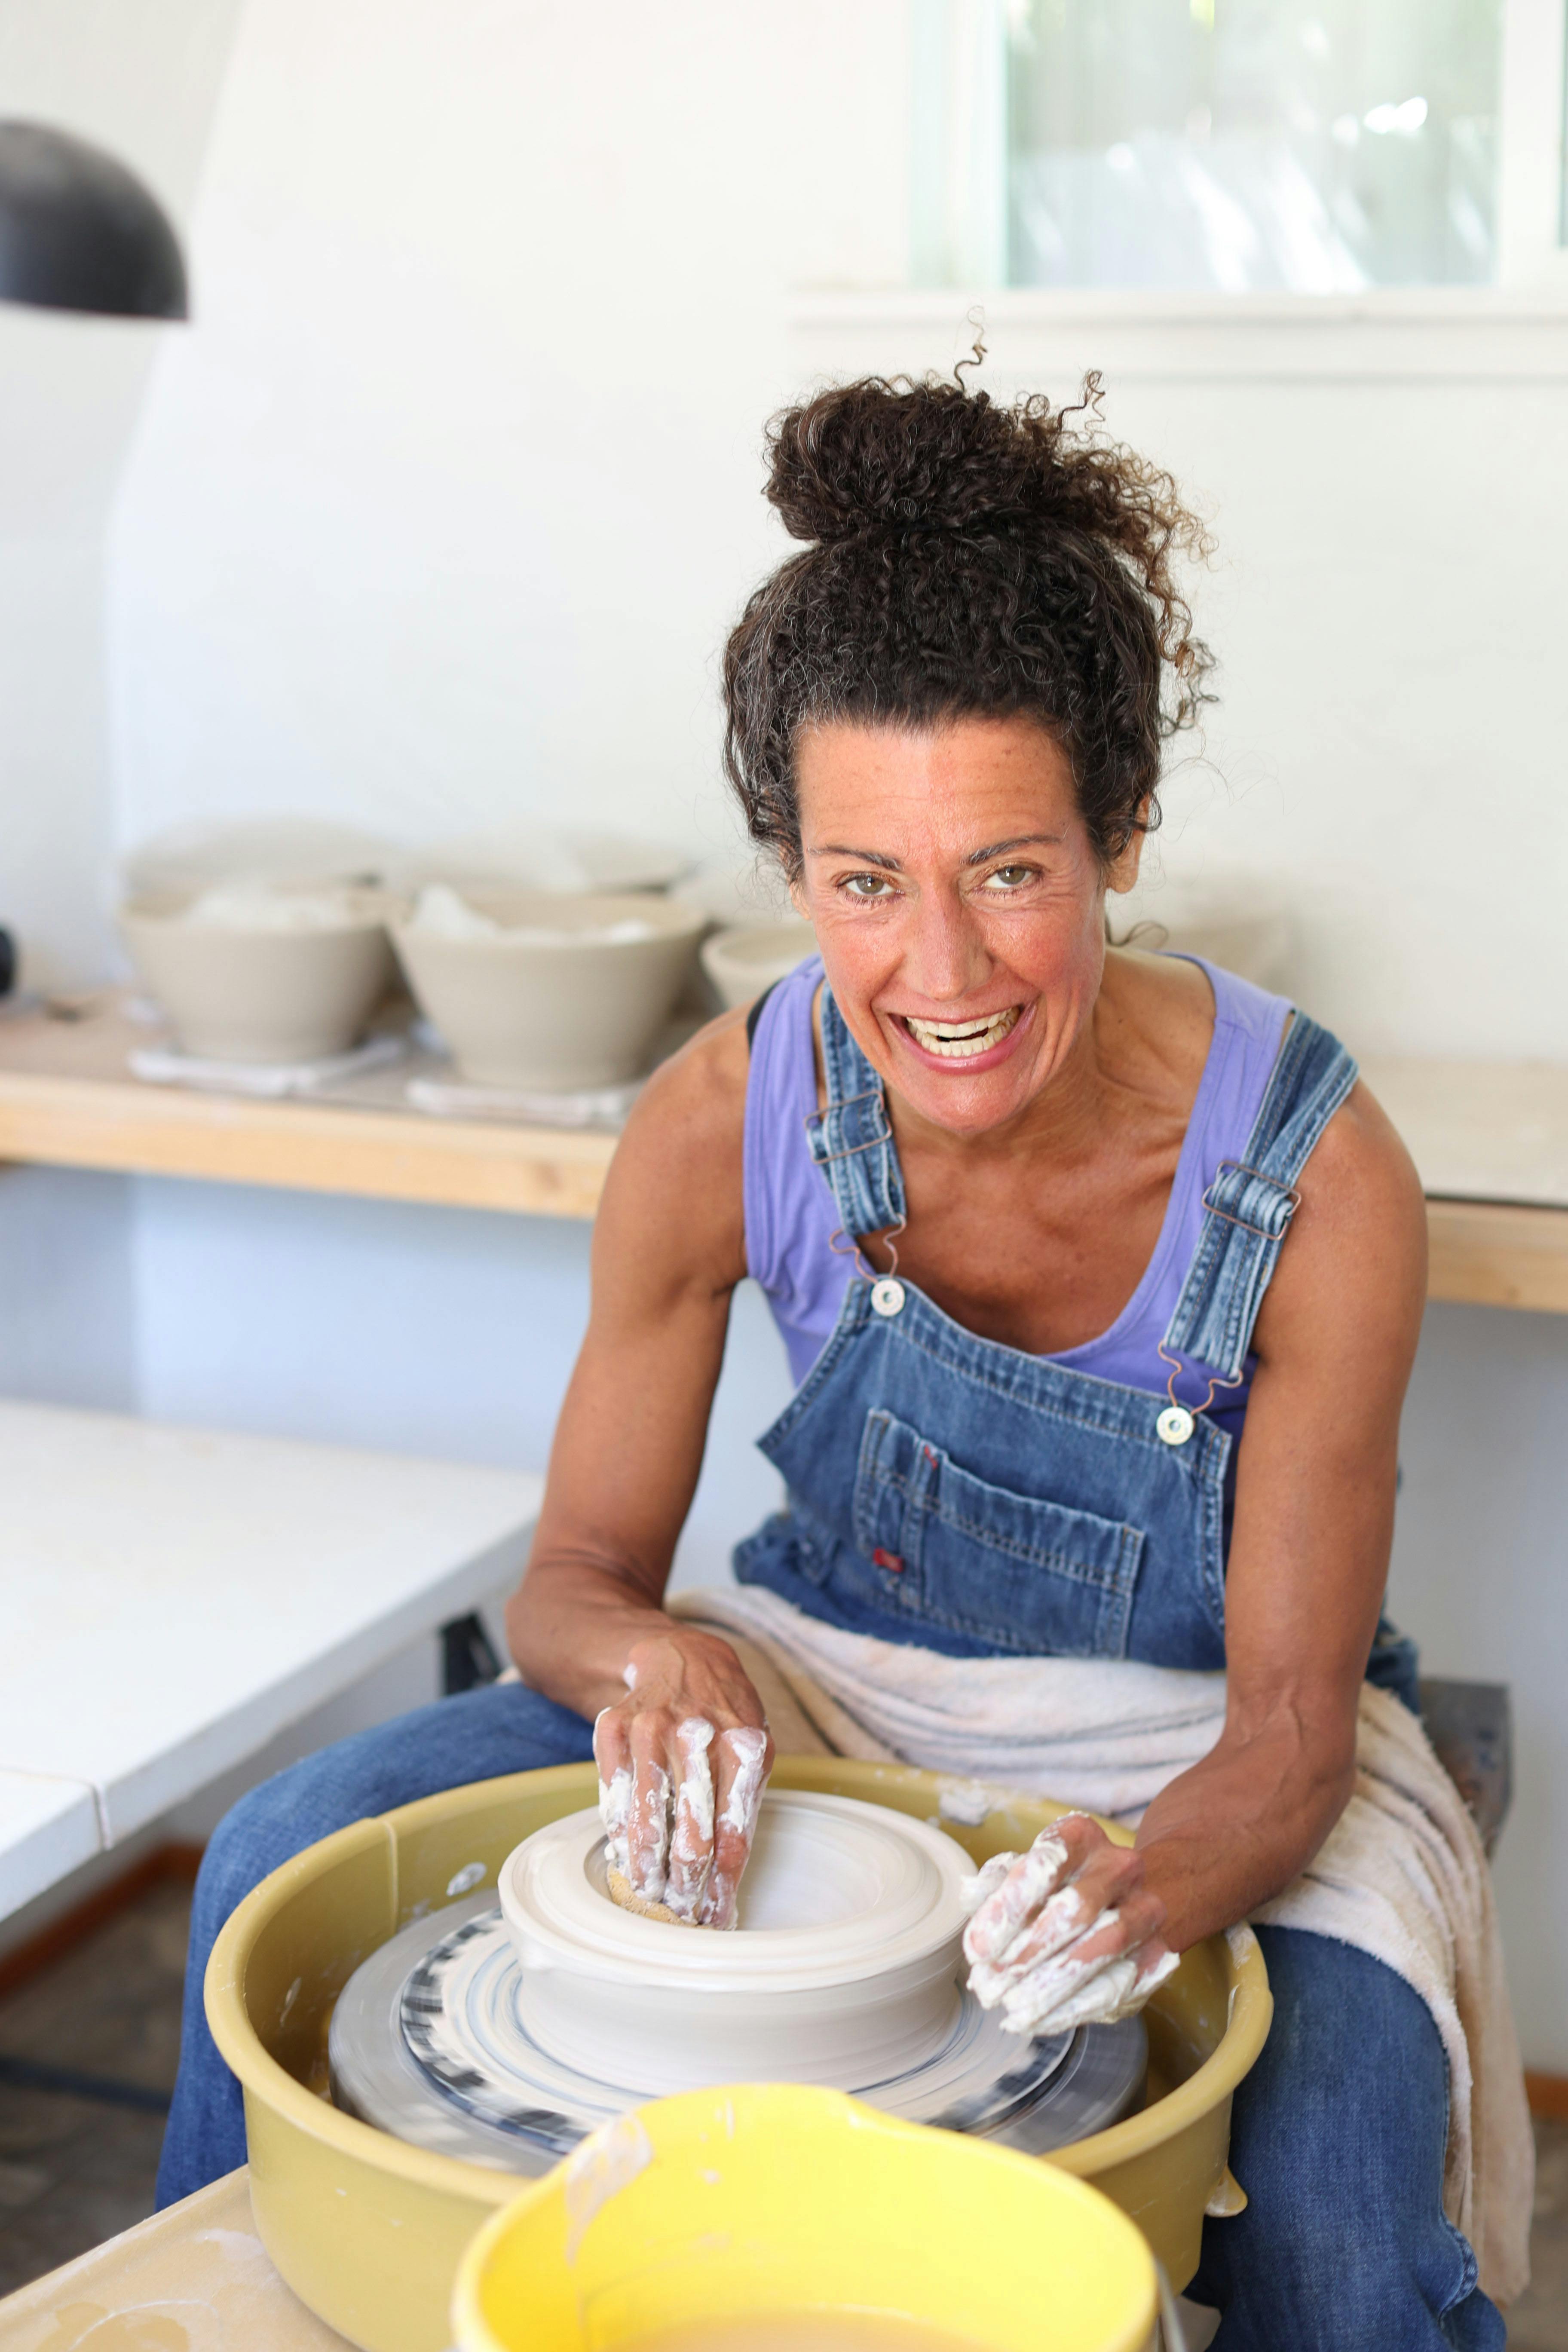 ceramic artist in purple tank top and overalls working on a pottery wheel and smiling